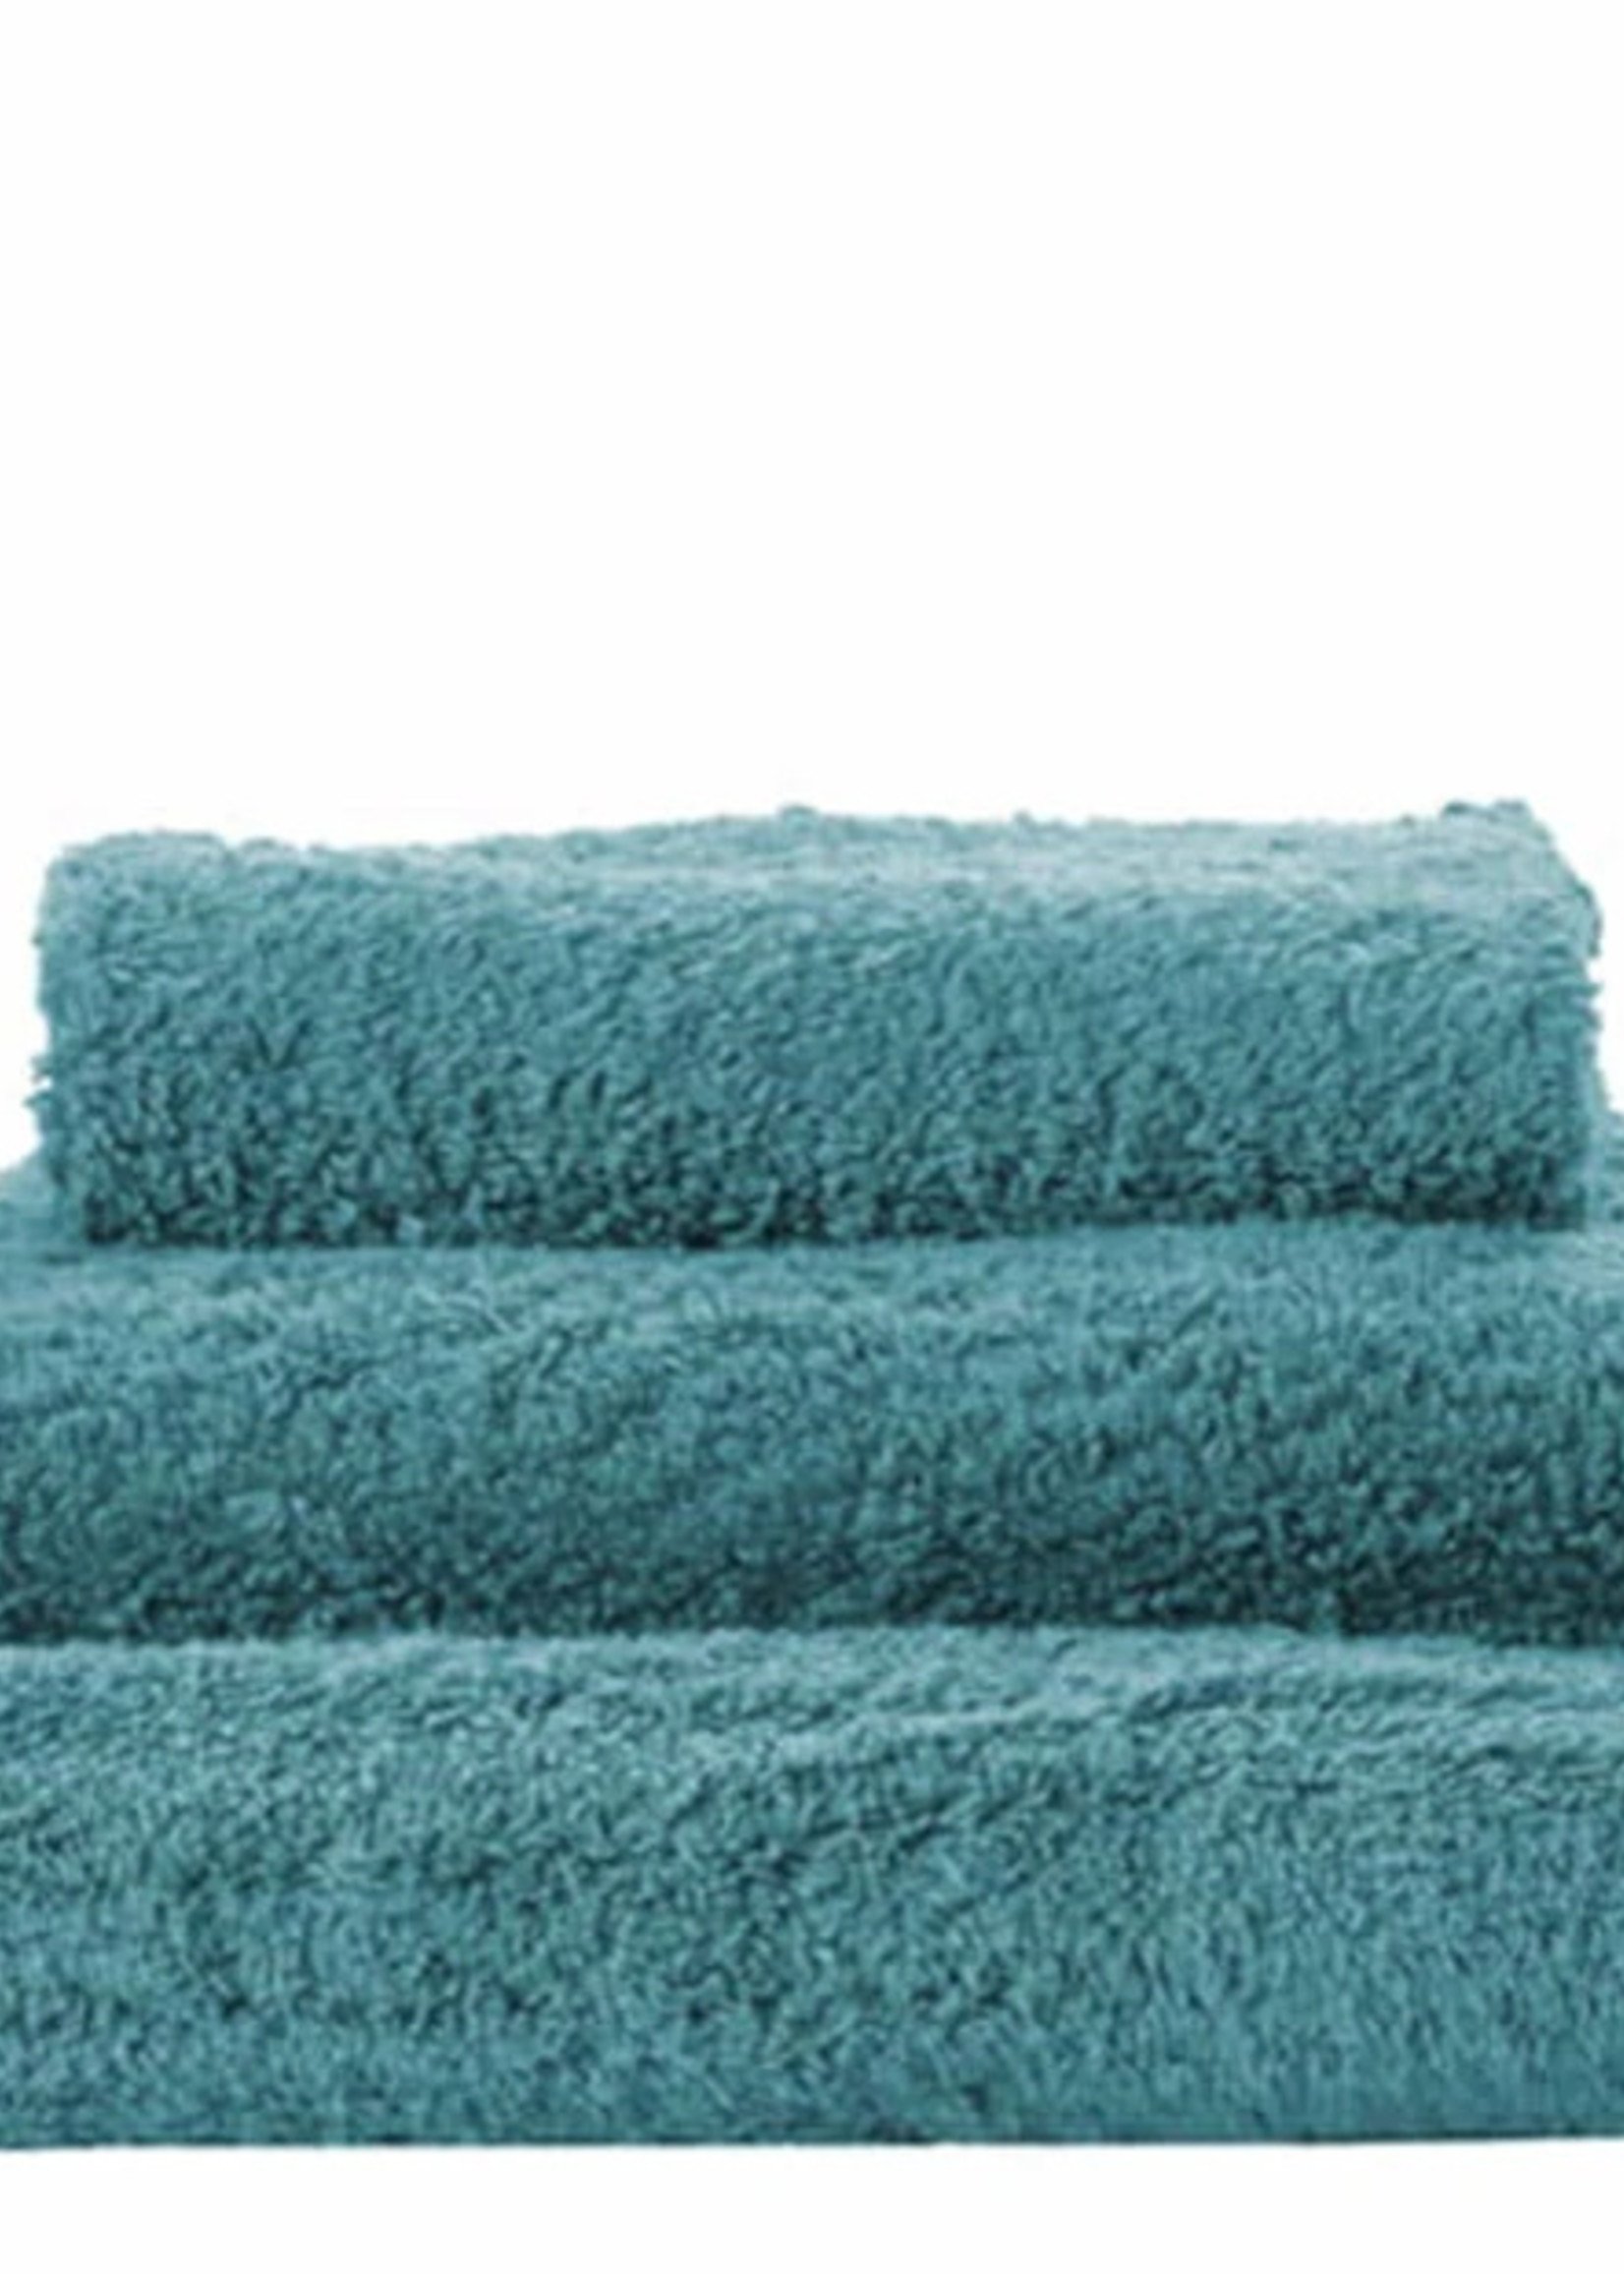 Abyss & Habidecor Super Pile Dragonfly Towels